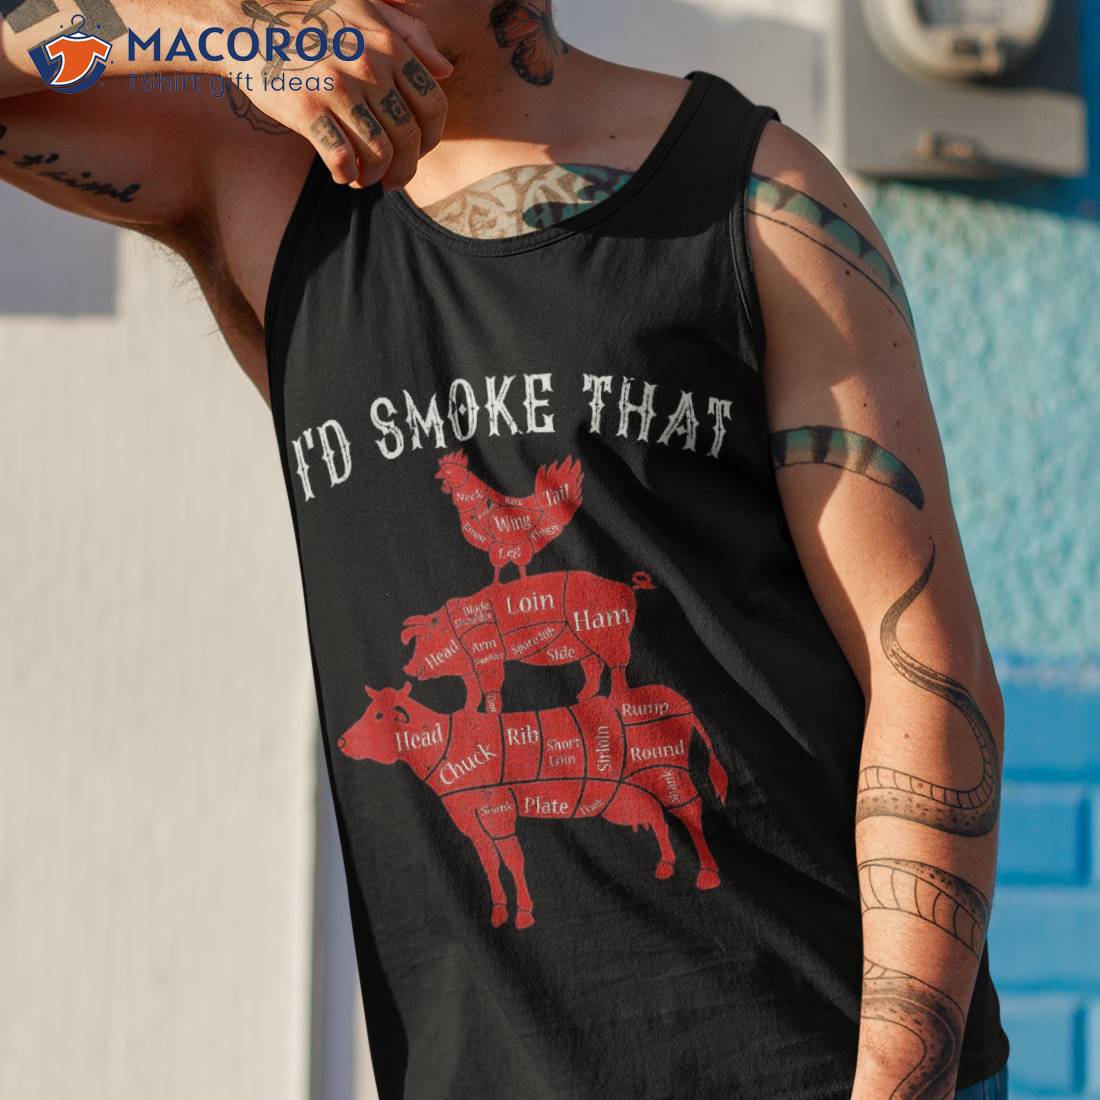 https://images.macoroo.com/wp-content/uploads/2023/06/i-d-smoke-that-barbecue-grilling-bbq-smoker-gift-for-dad-shirt-tank-top-1.jpg